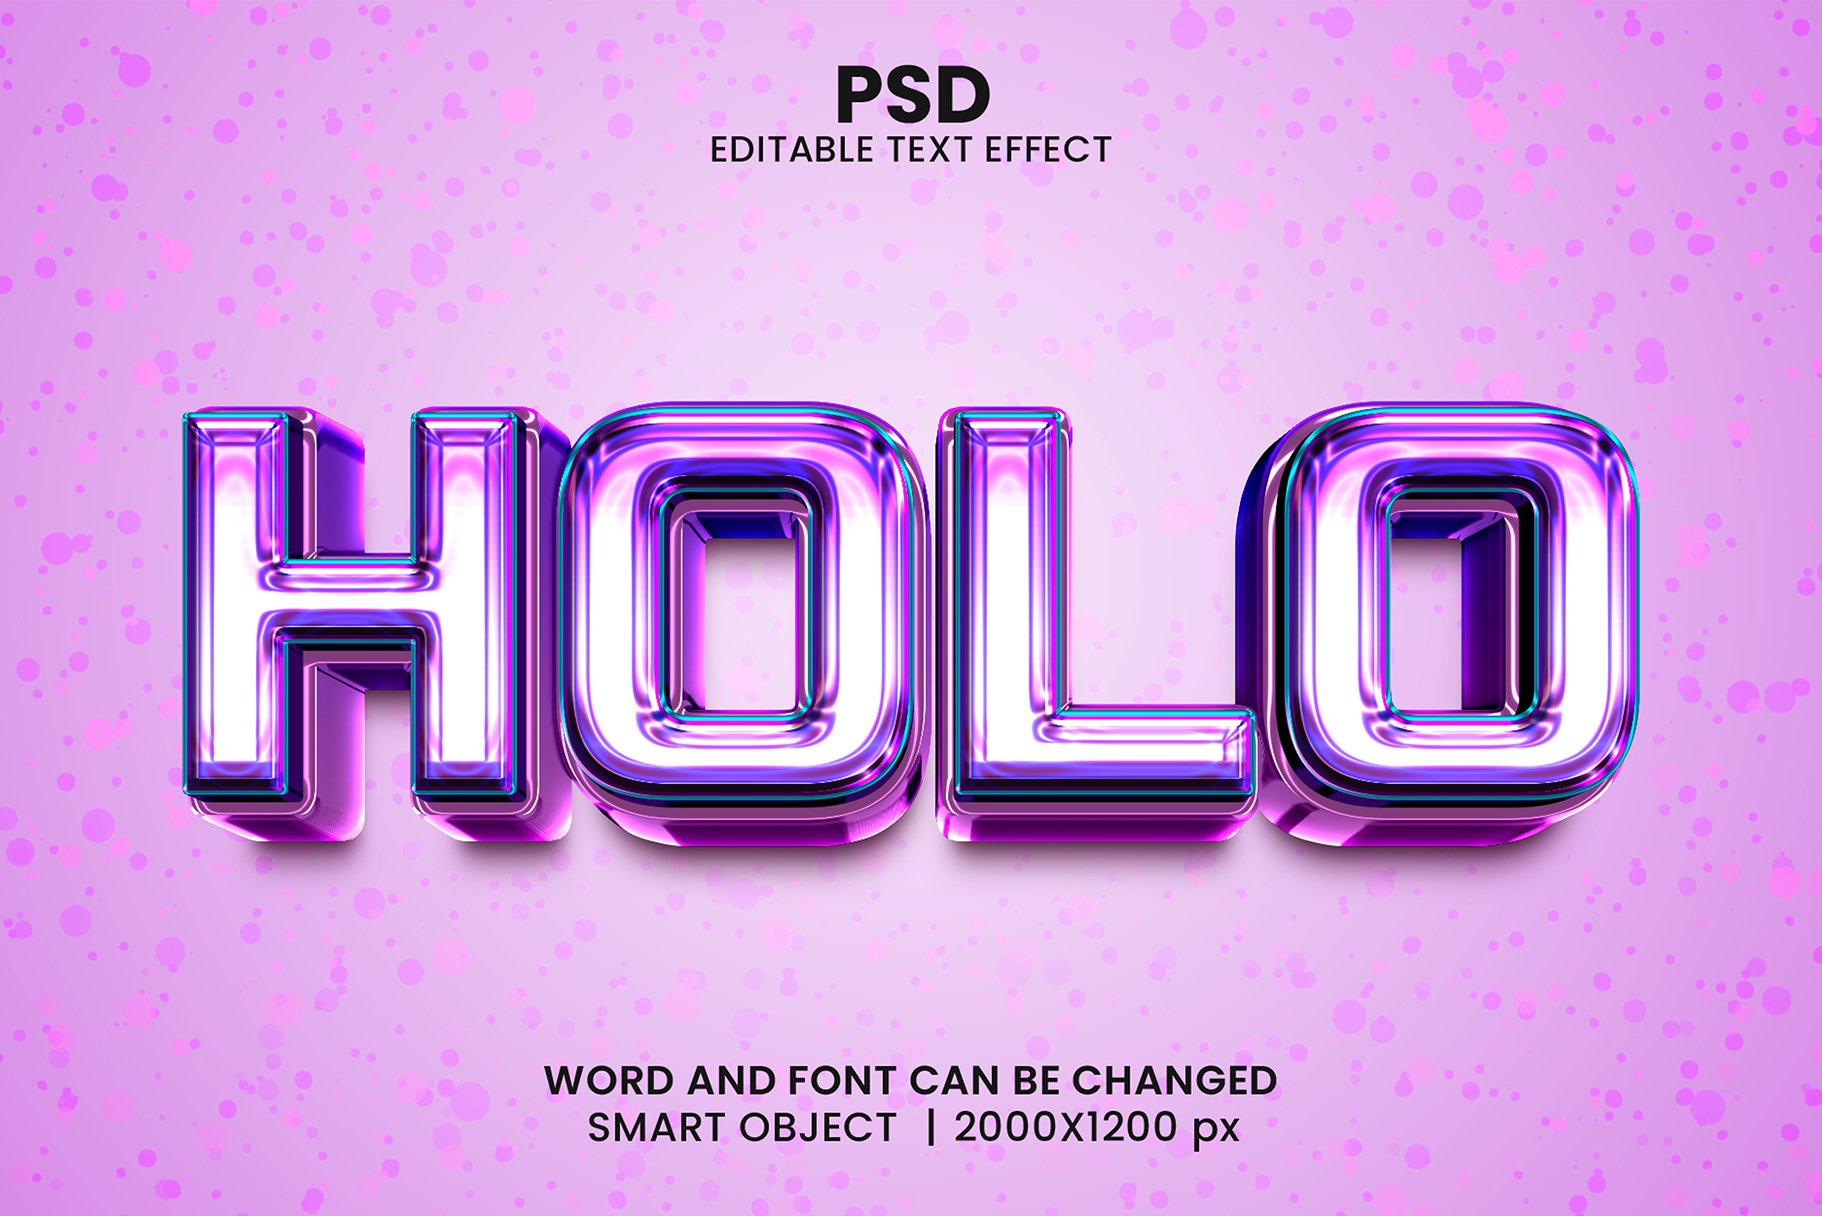 Holo 3d Editable Text Effect Stylecover image.